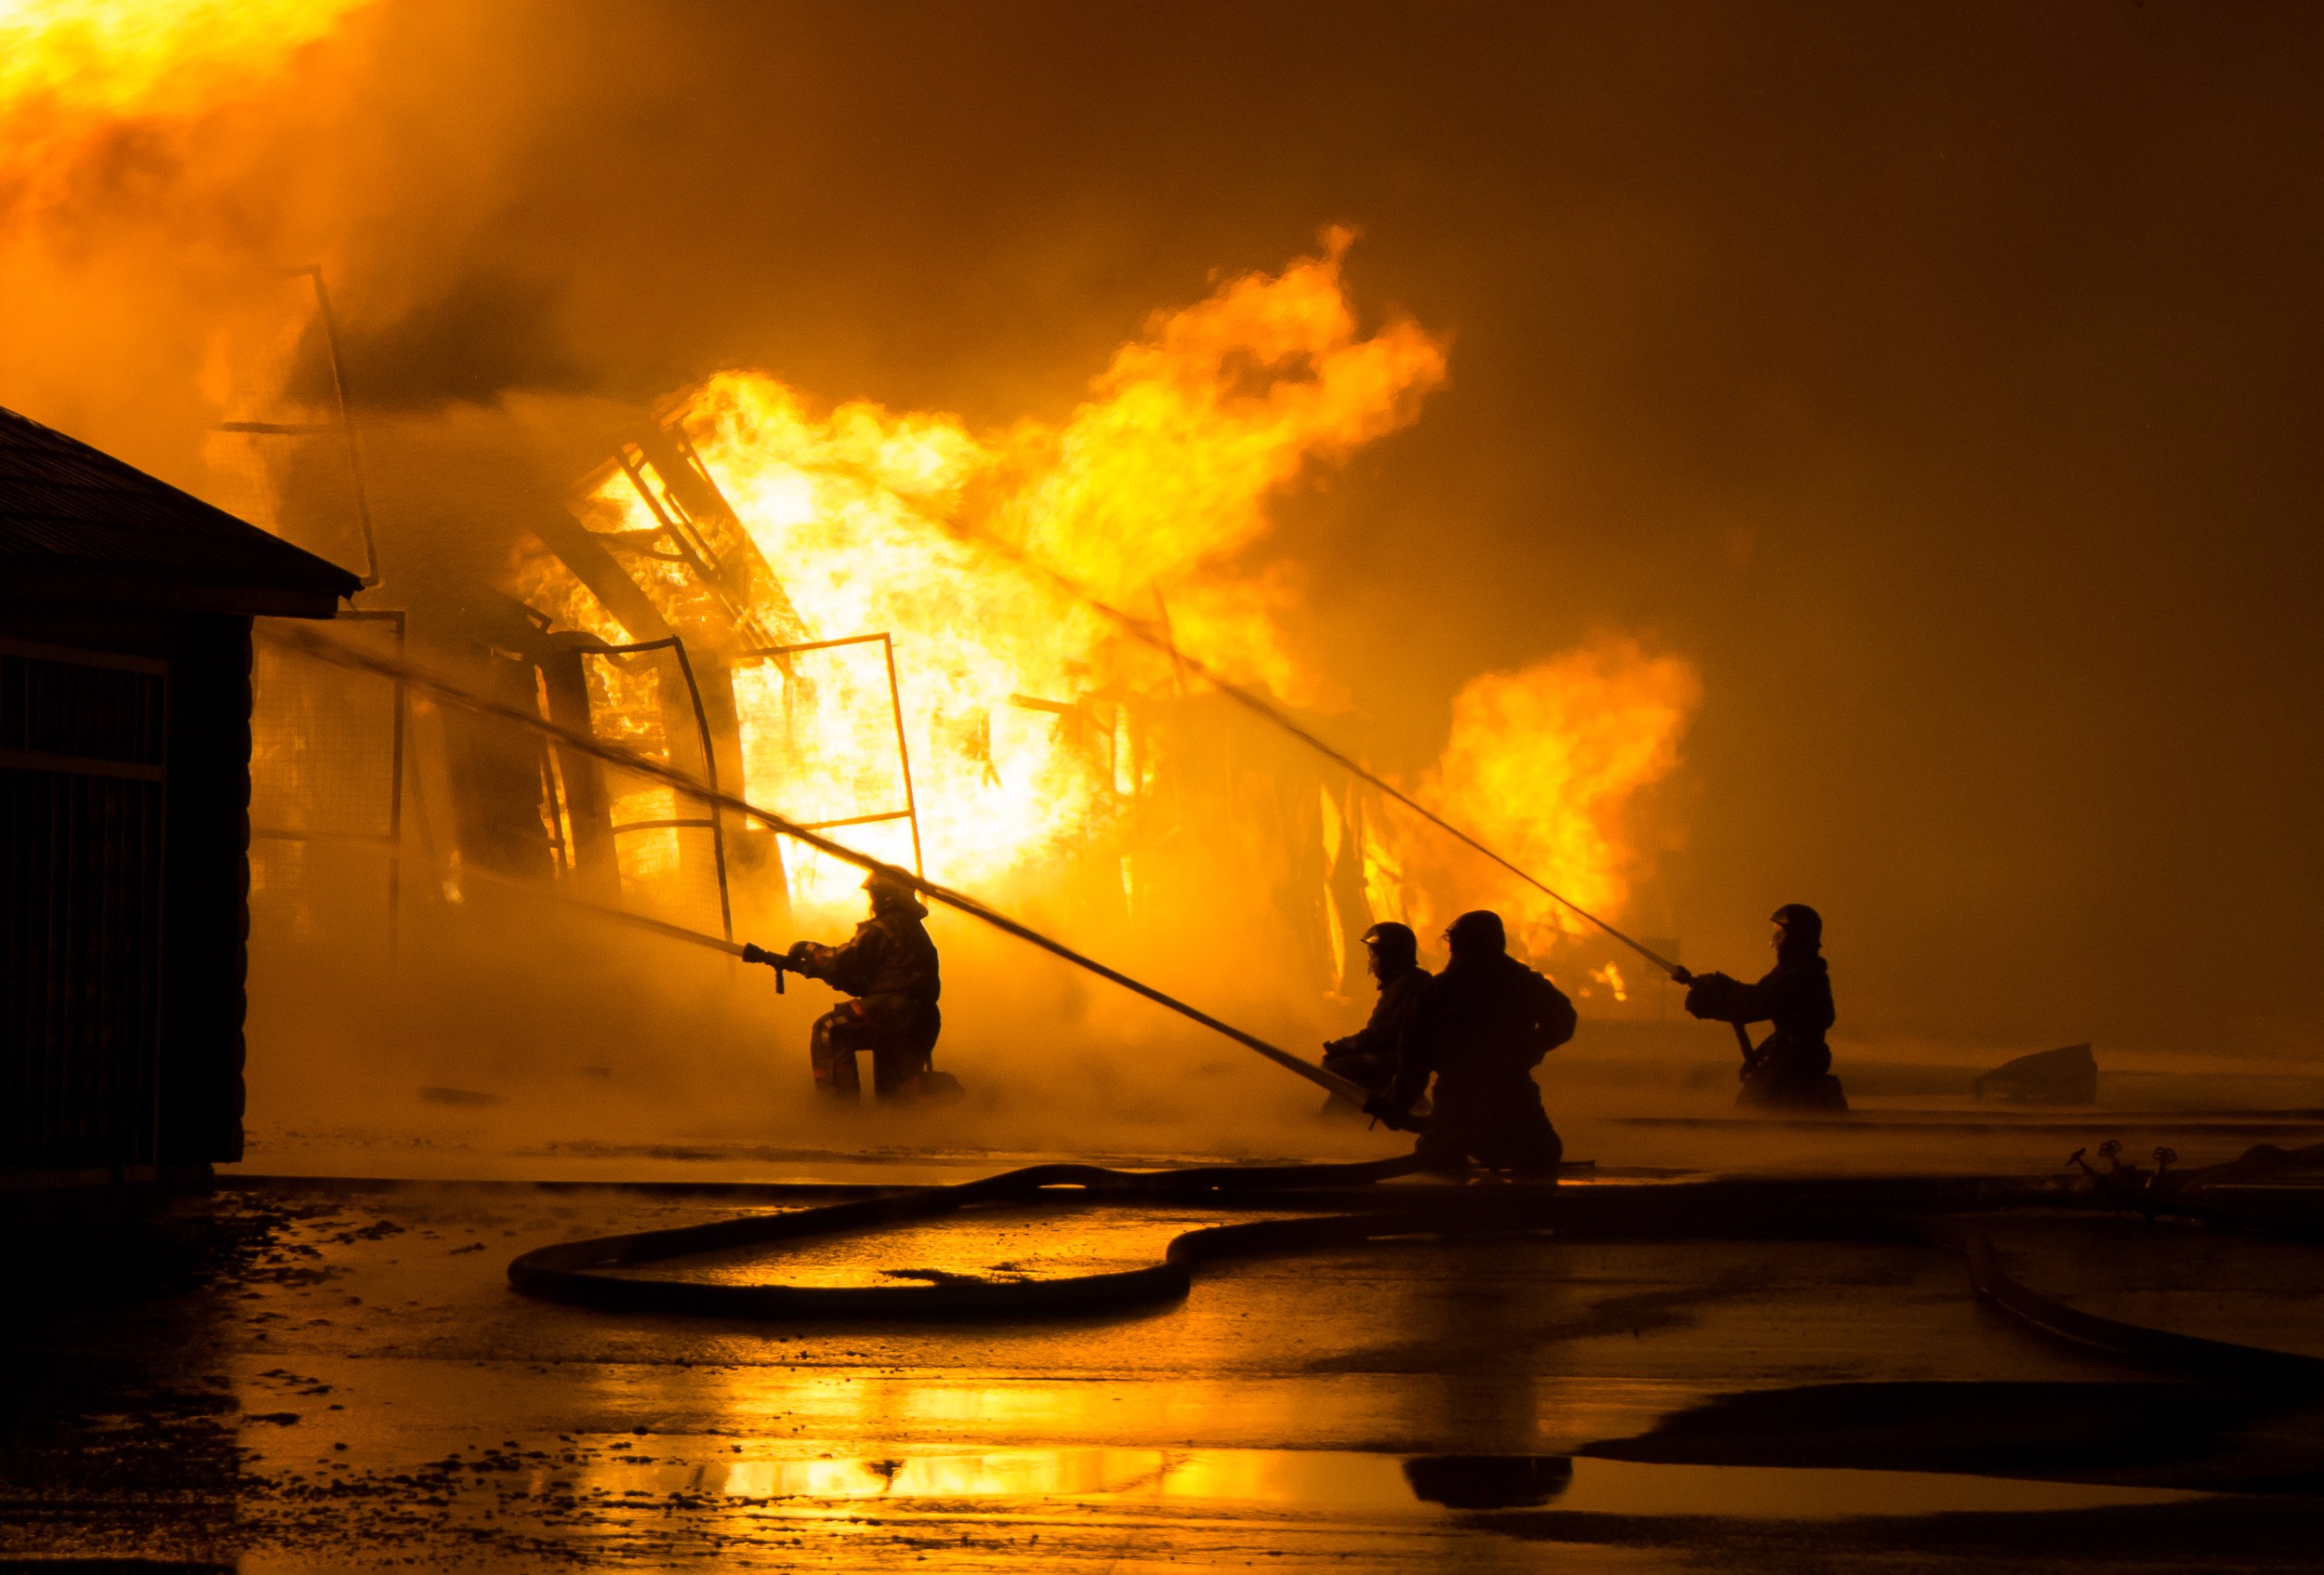 Firemen at work on fire –